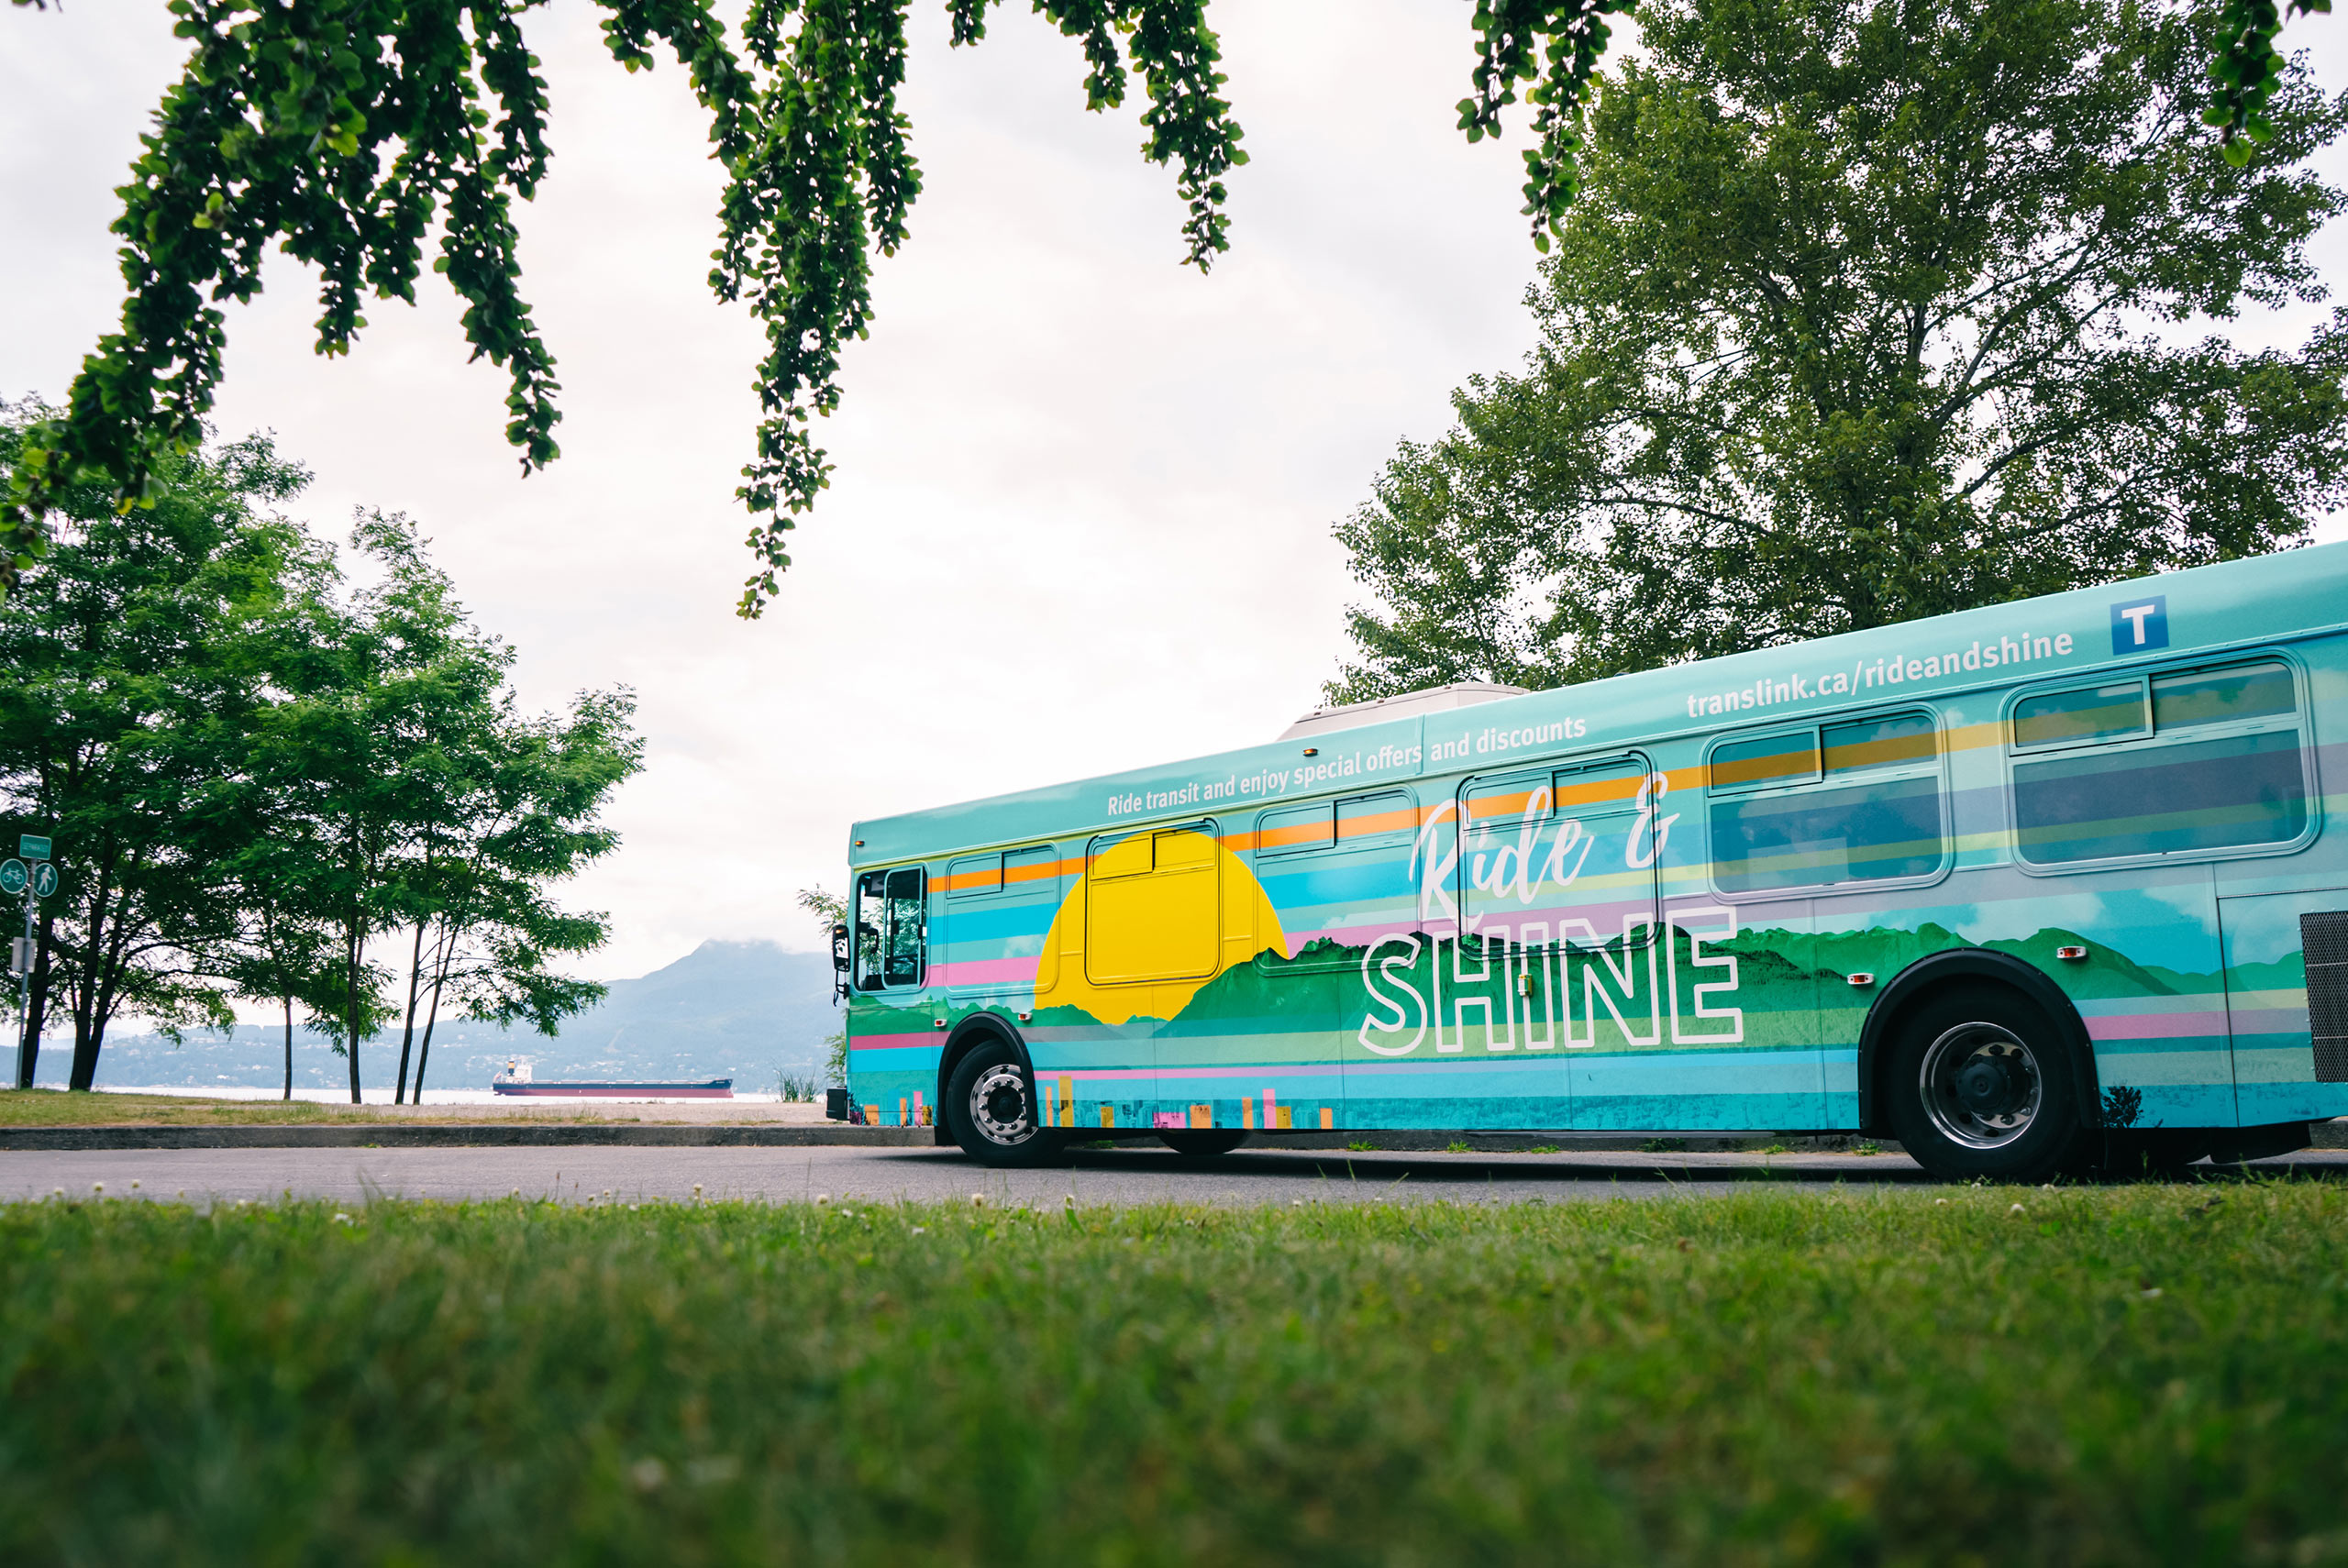 Mostly Teal Ride and Shine bus framed between the green grass and tree branches